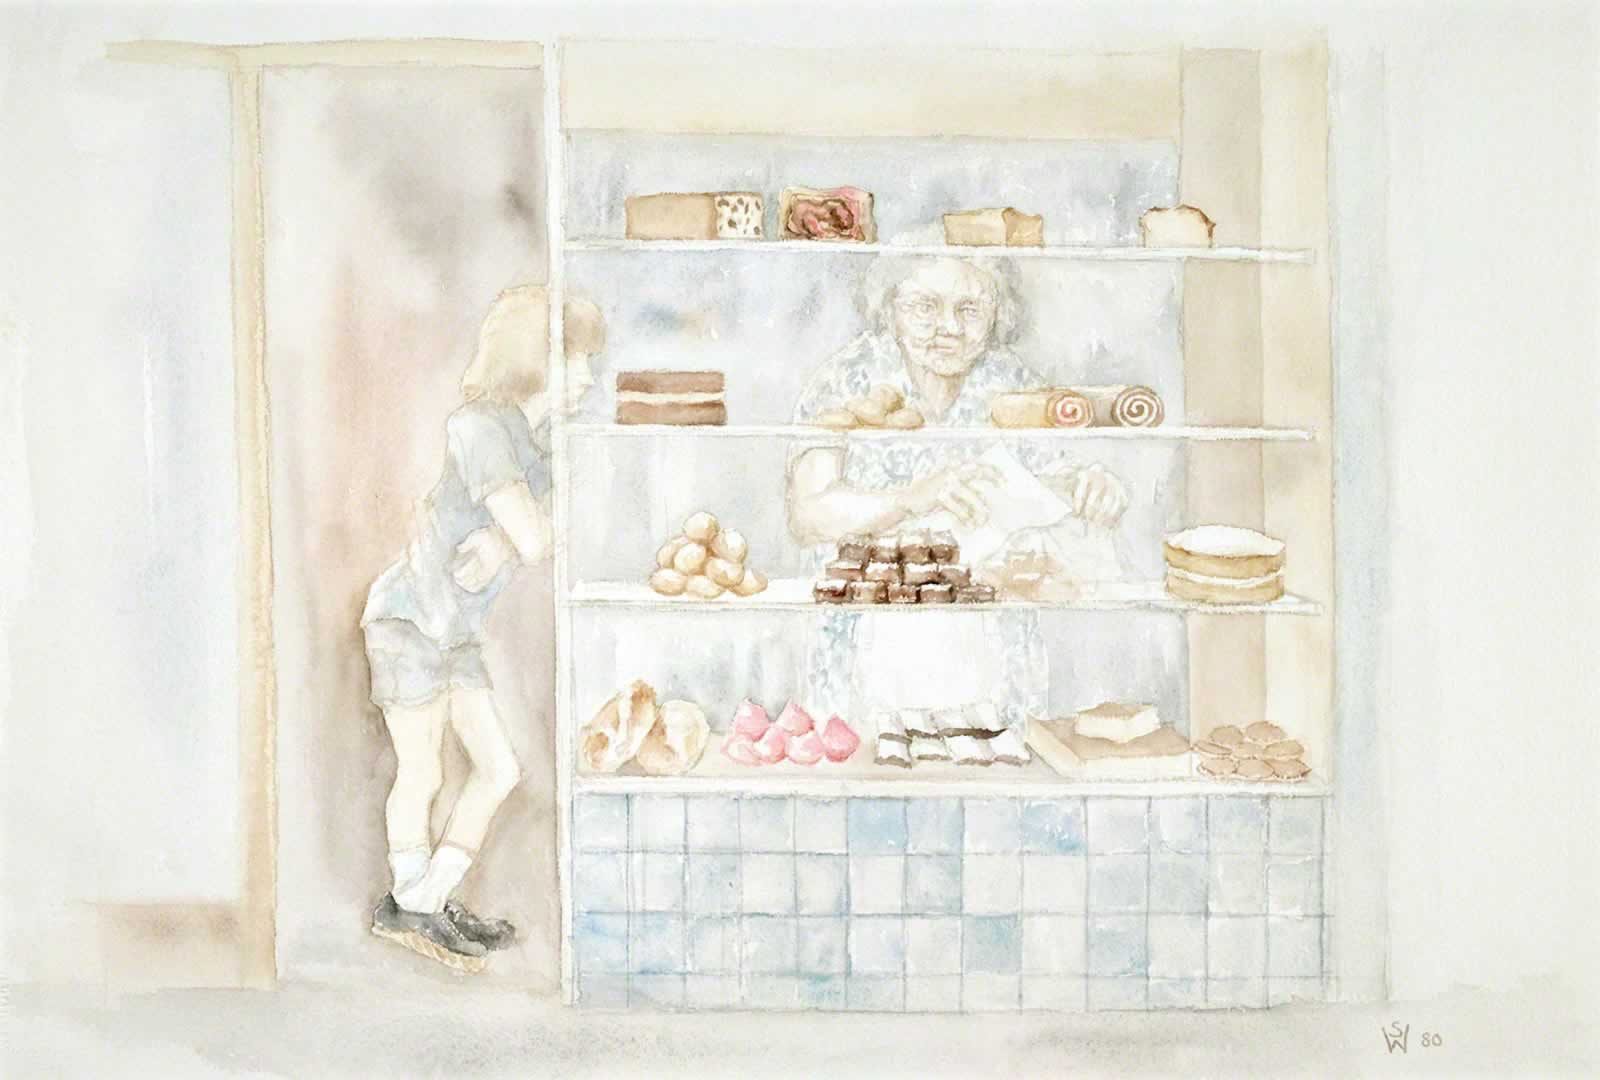 Five Pikelets, Please' (Annandale Village Cake-shop) by Susan Dorothea White